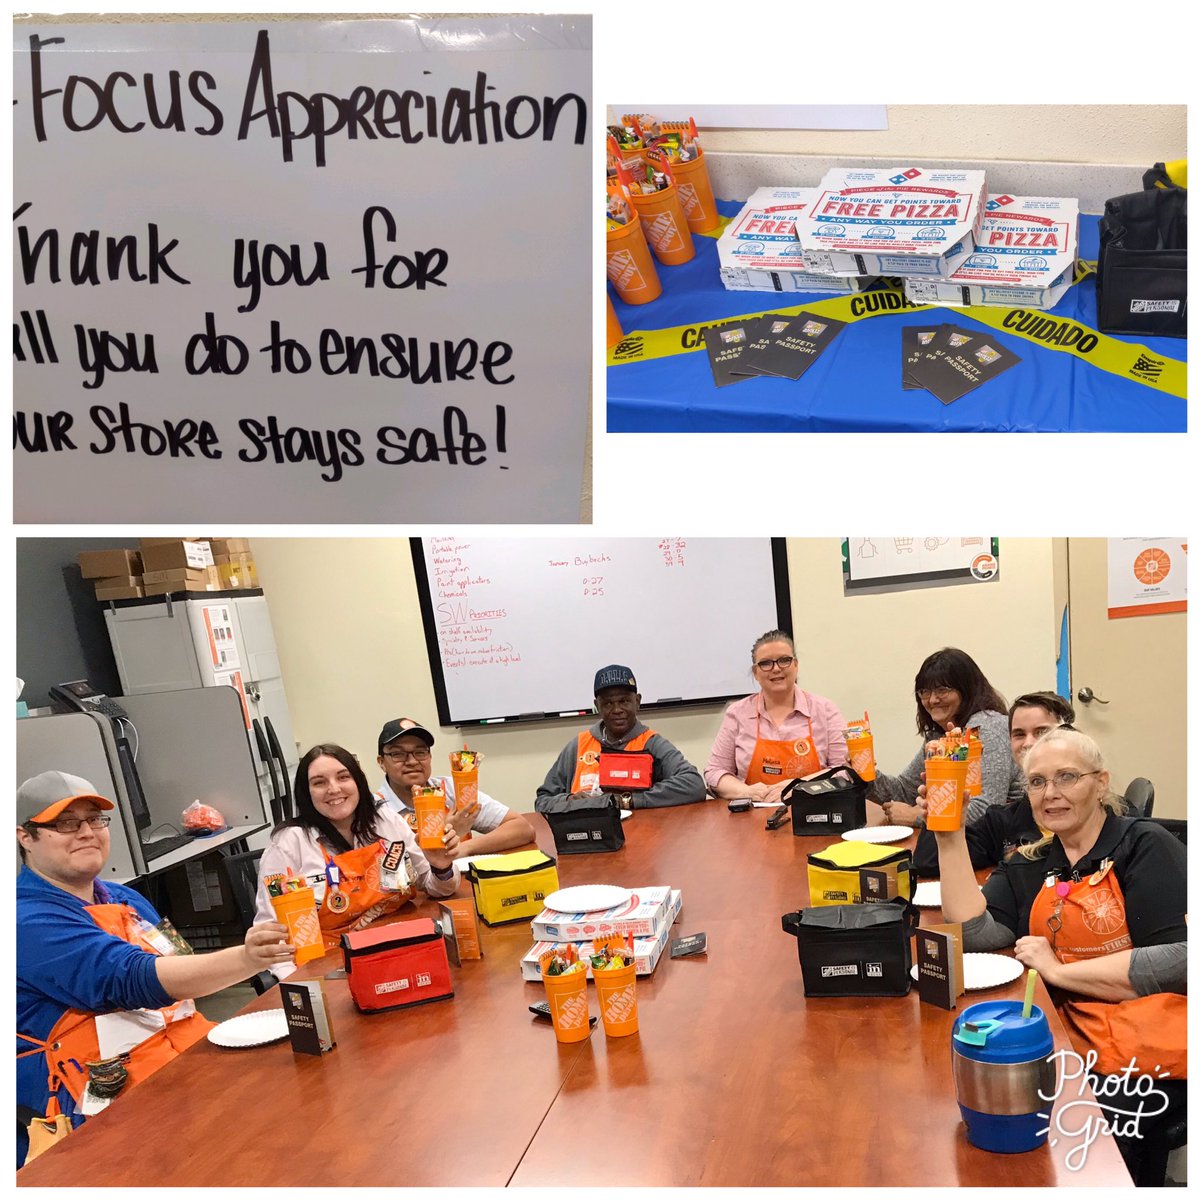 Showing our appreciation for this awesome InFocus Team at 6549! Thank you for working to keep everyone safe!  #whyiworksafe